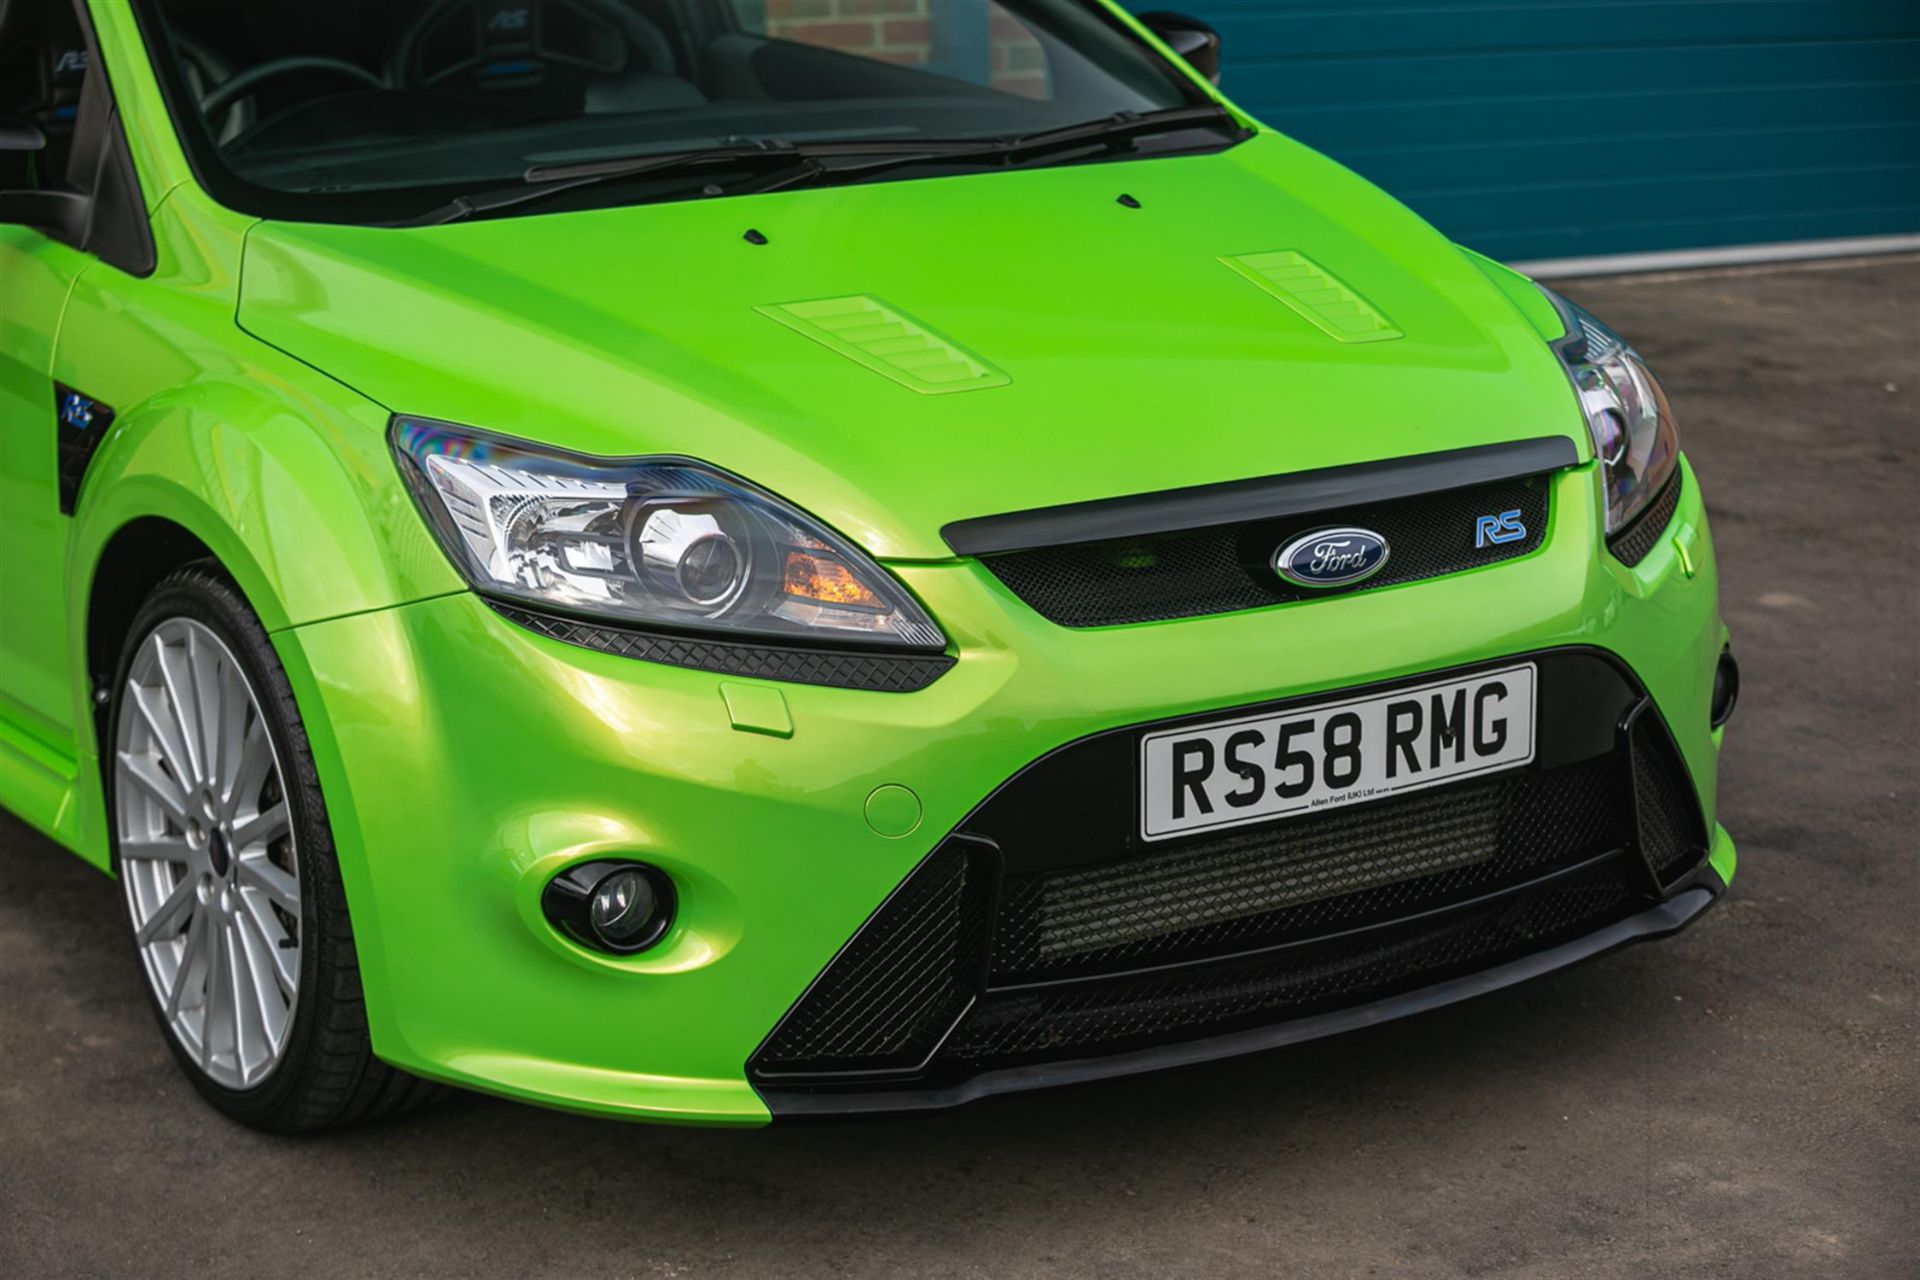 2010 Ford Focus RS Mk2 - Image 8 of 10